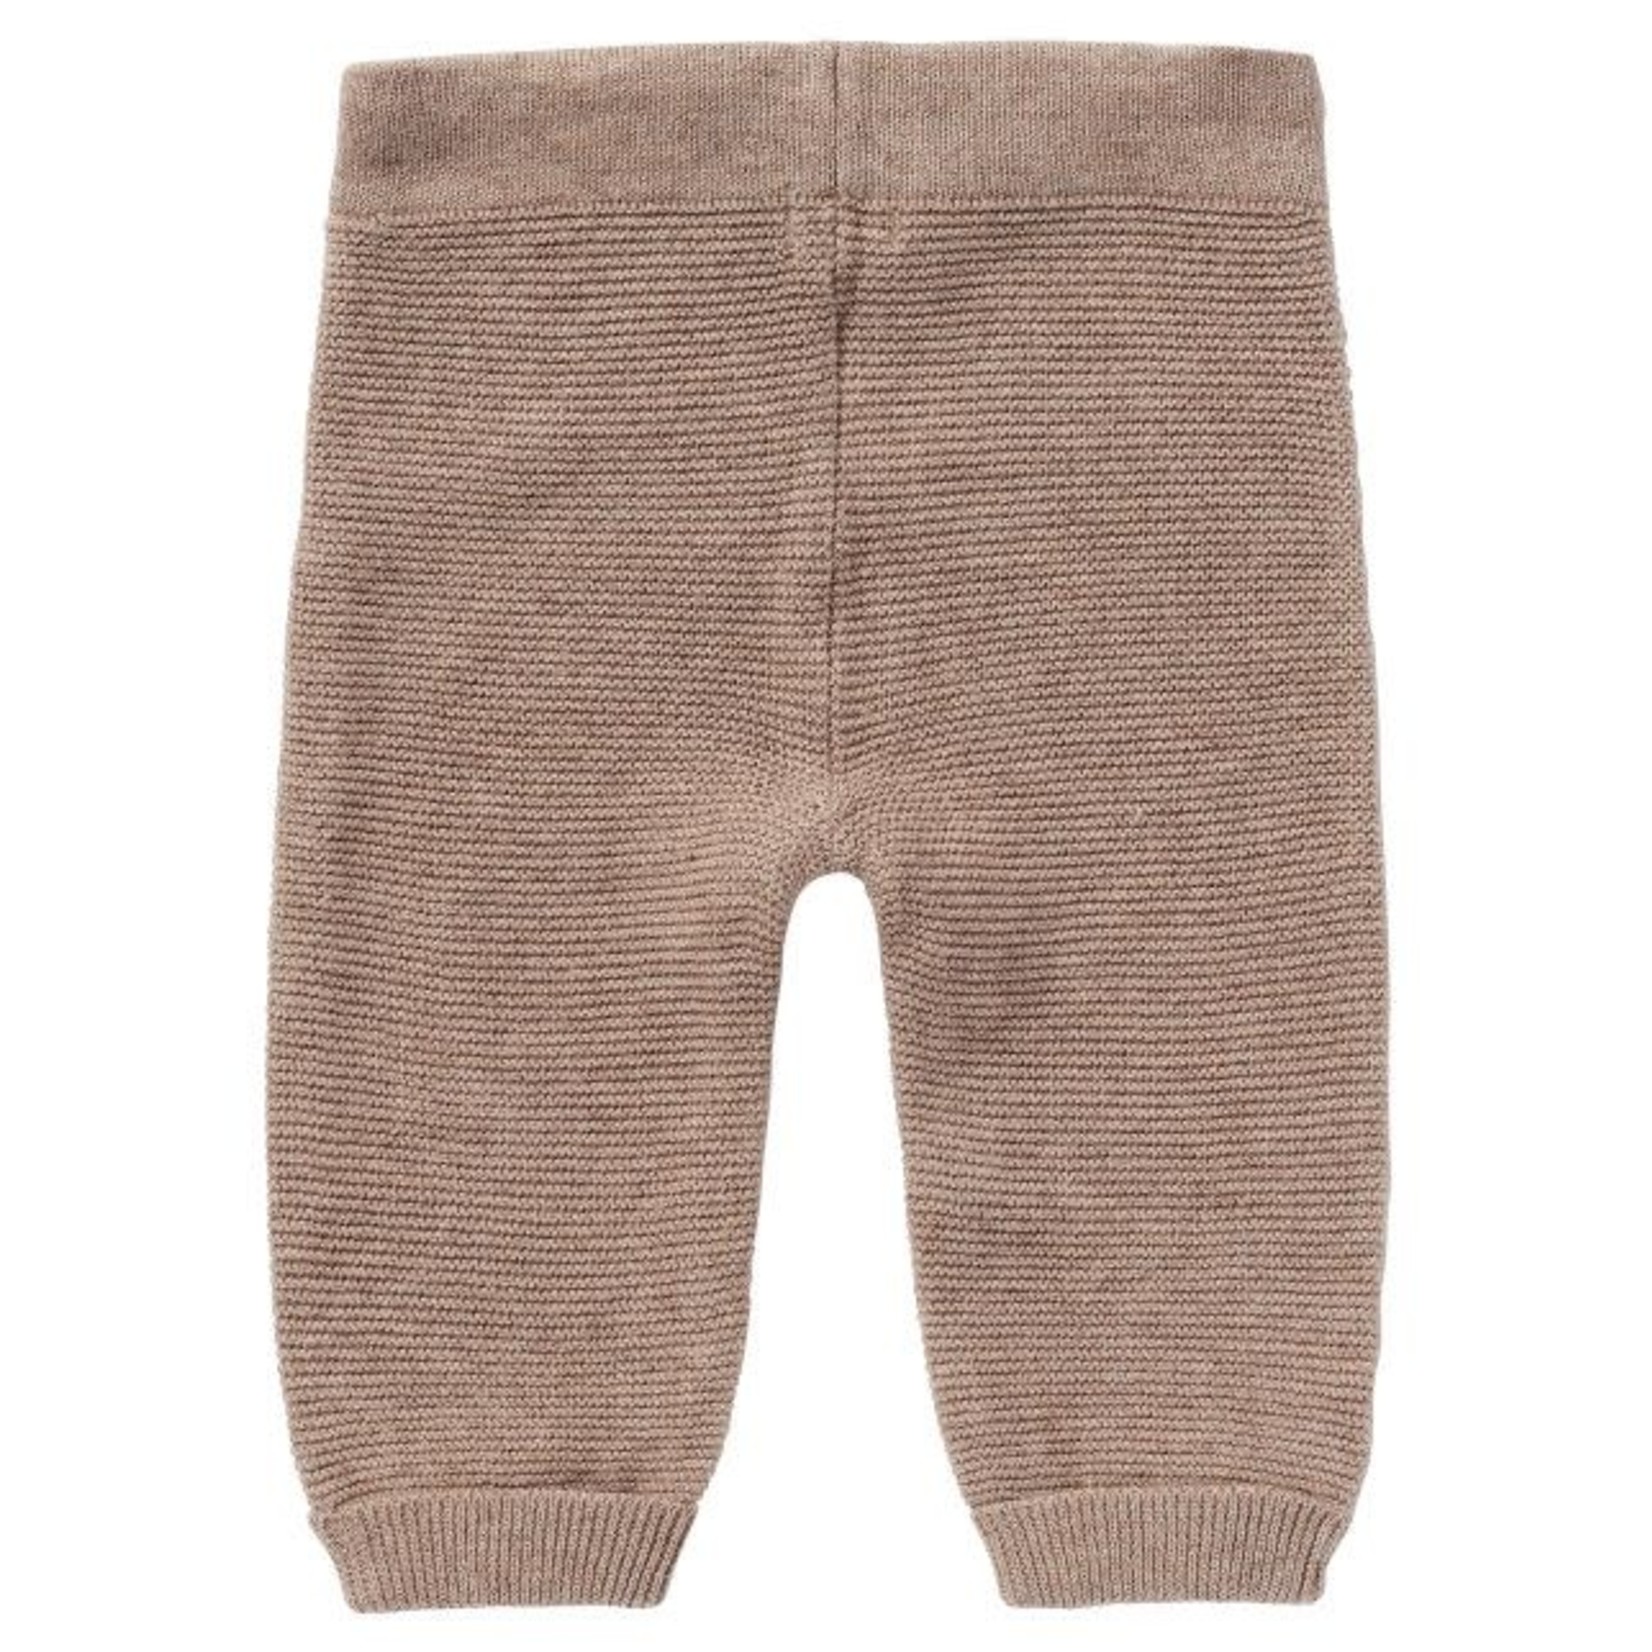 Noppies Noppies Pants Grover - Taupe